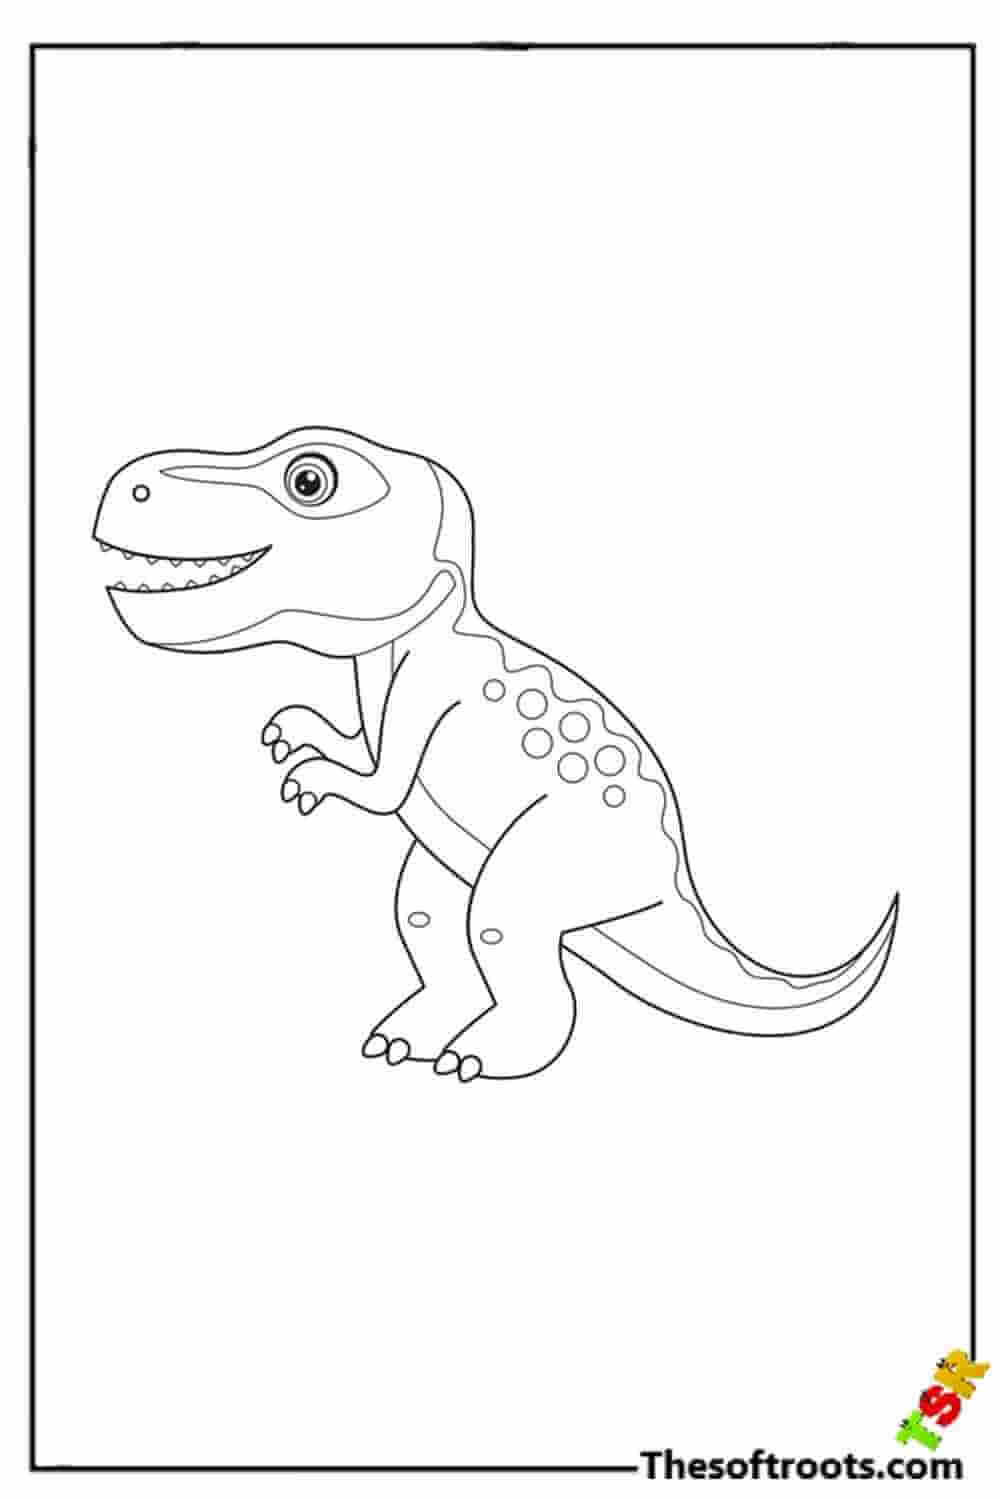 Simple T-Rex coloring pages